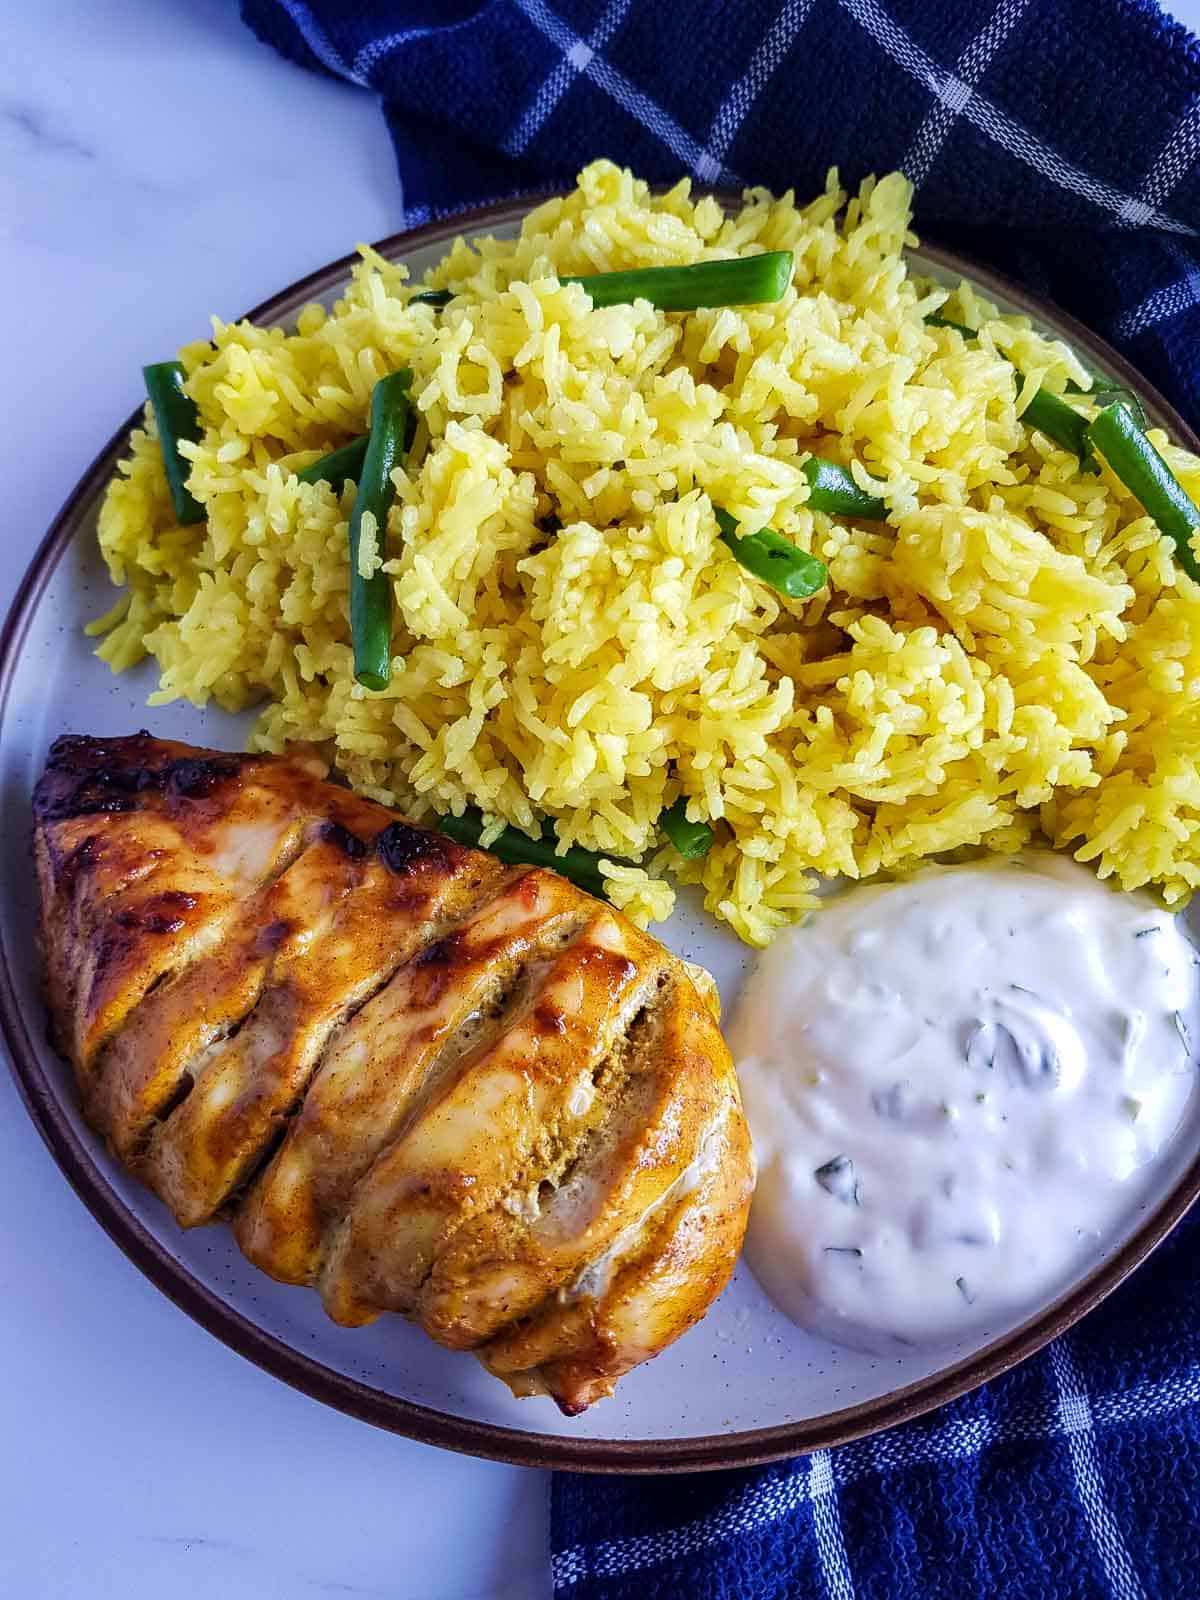 Grilled chicken and rice.